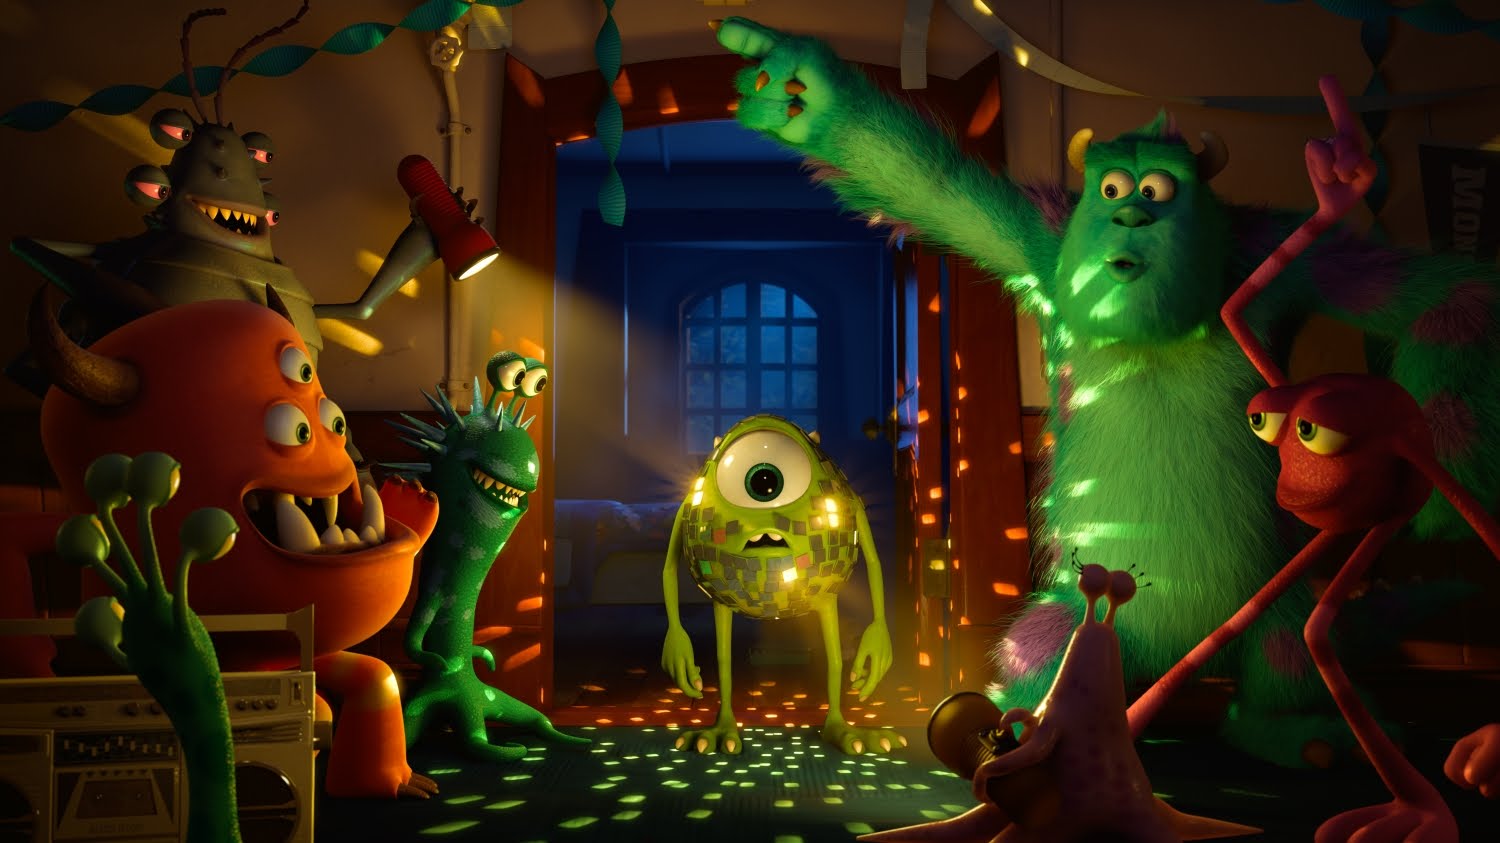 Monsters-Inc-2-Picture (4)